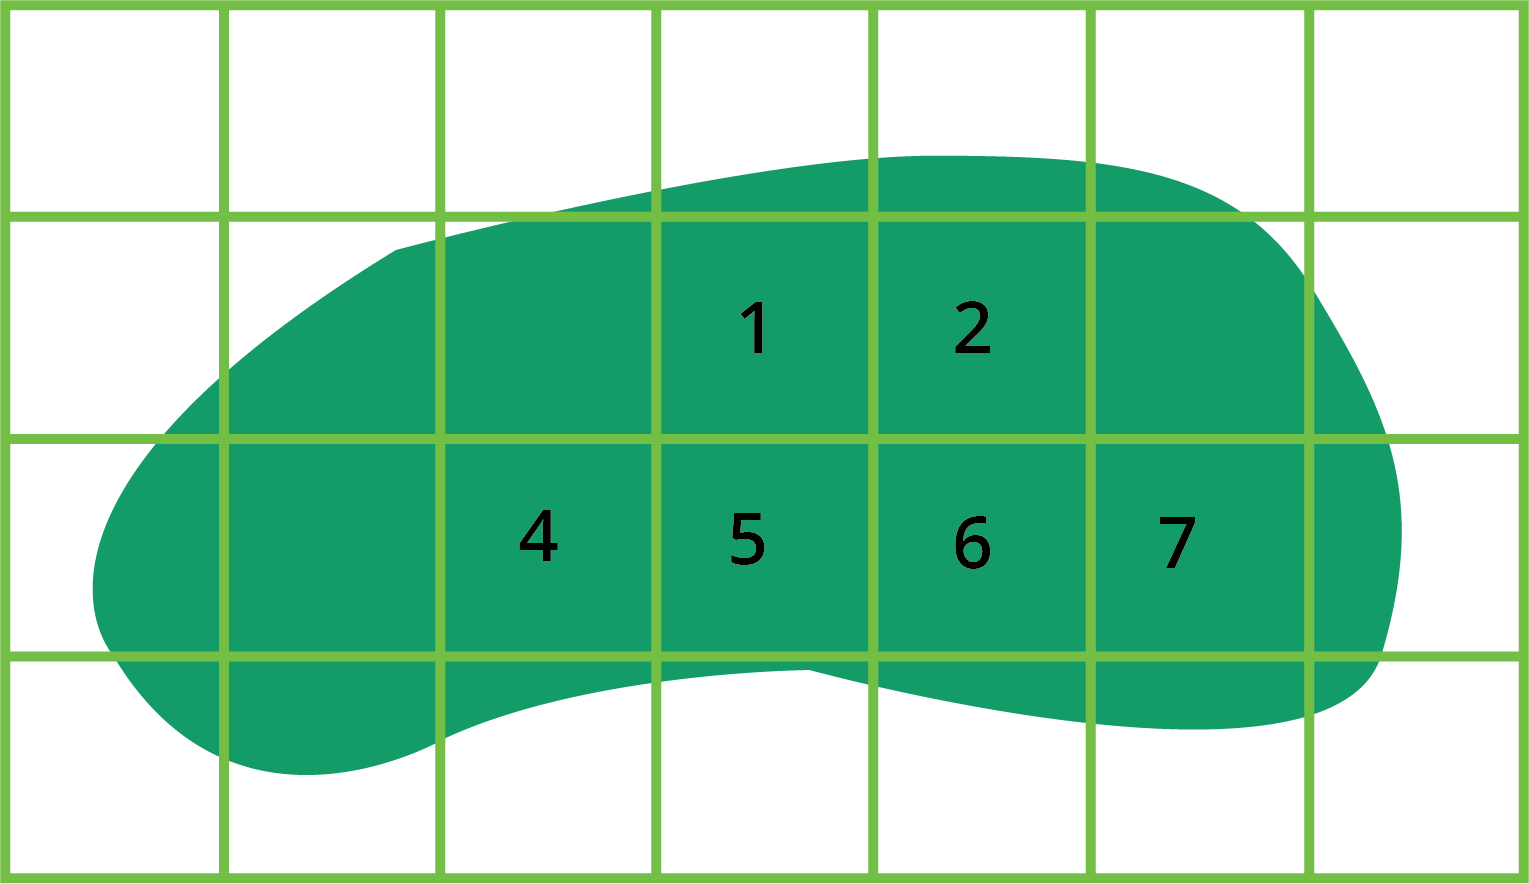 Area of green part with the help of small squares